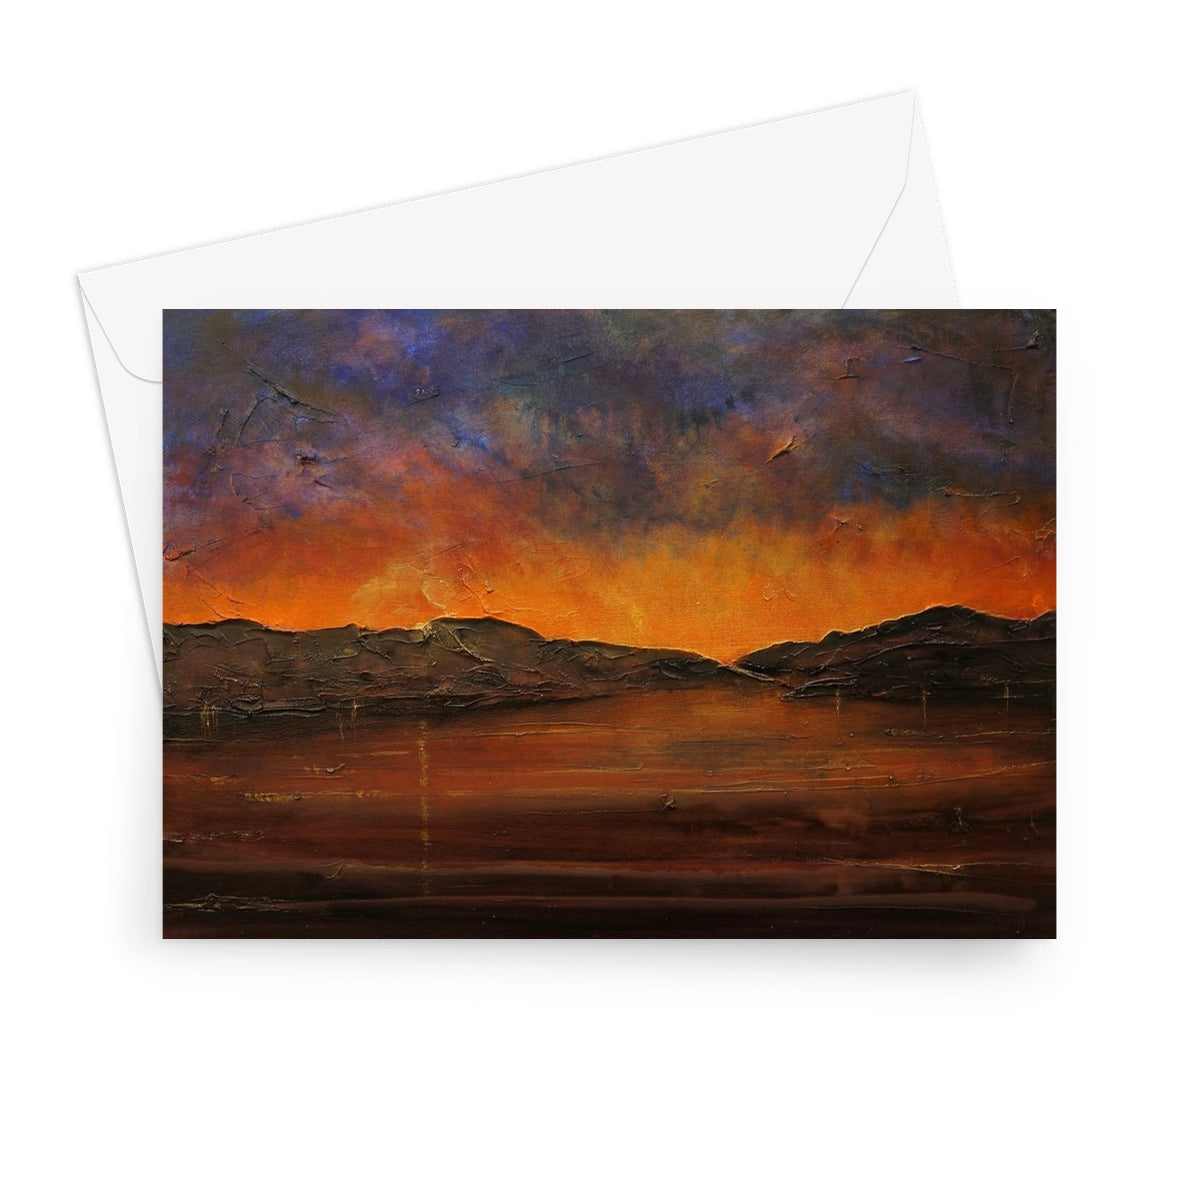 A Brooding Clyde Dusk Art Gifts Greeting Card-Stationery-River Clyde Art Gallery-7"x5"-1 Card-Paintings, Prints, Homeware, Art Gifts From Scotland By Scottish Artist Kevin Hunter